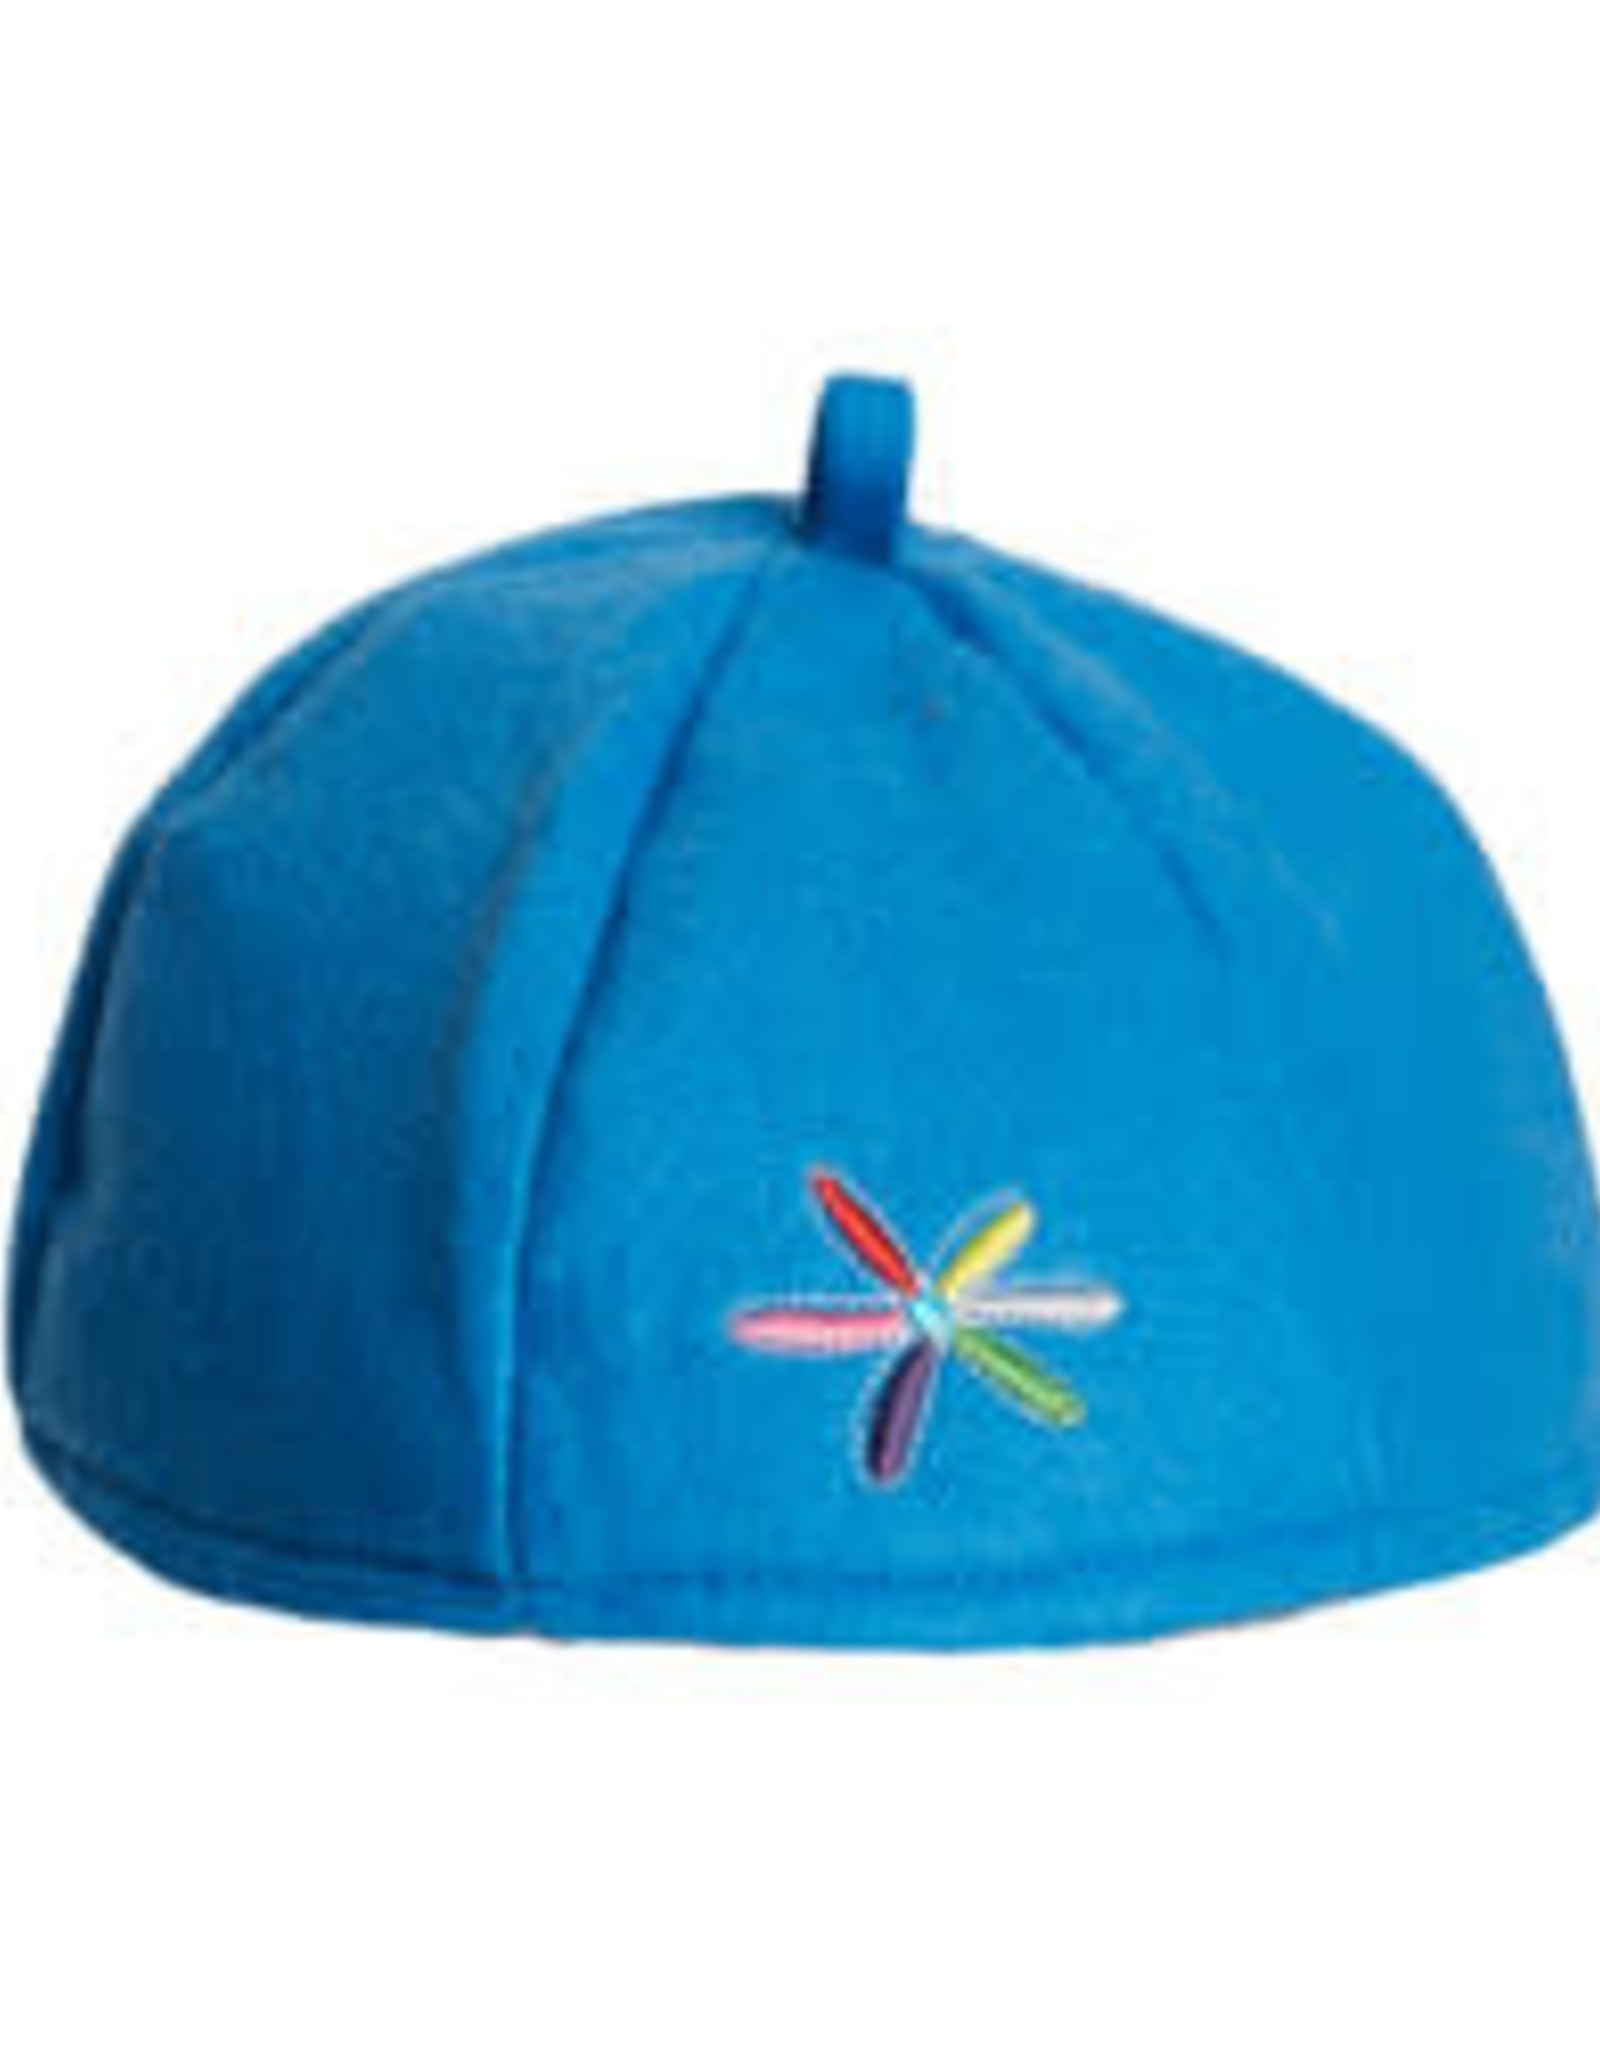 GIRL SCOUTS OF THE USA New Daisy Beanie